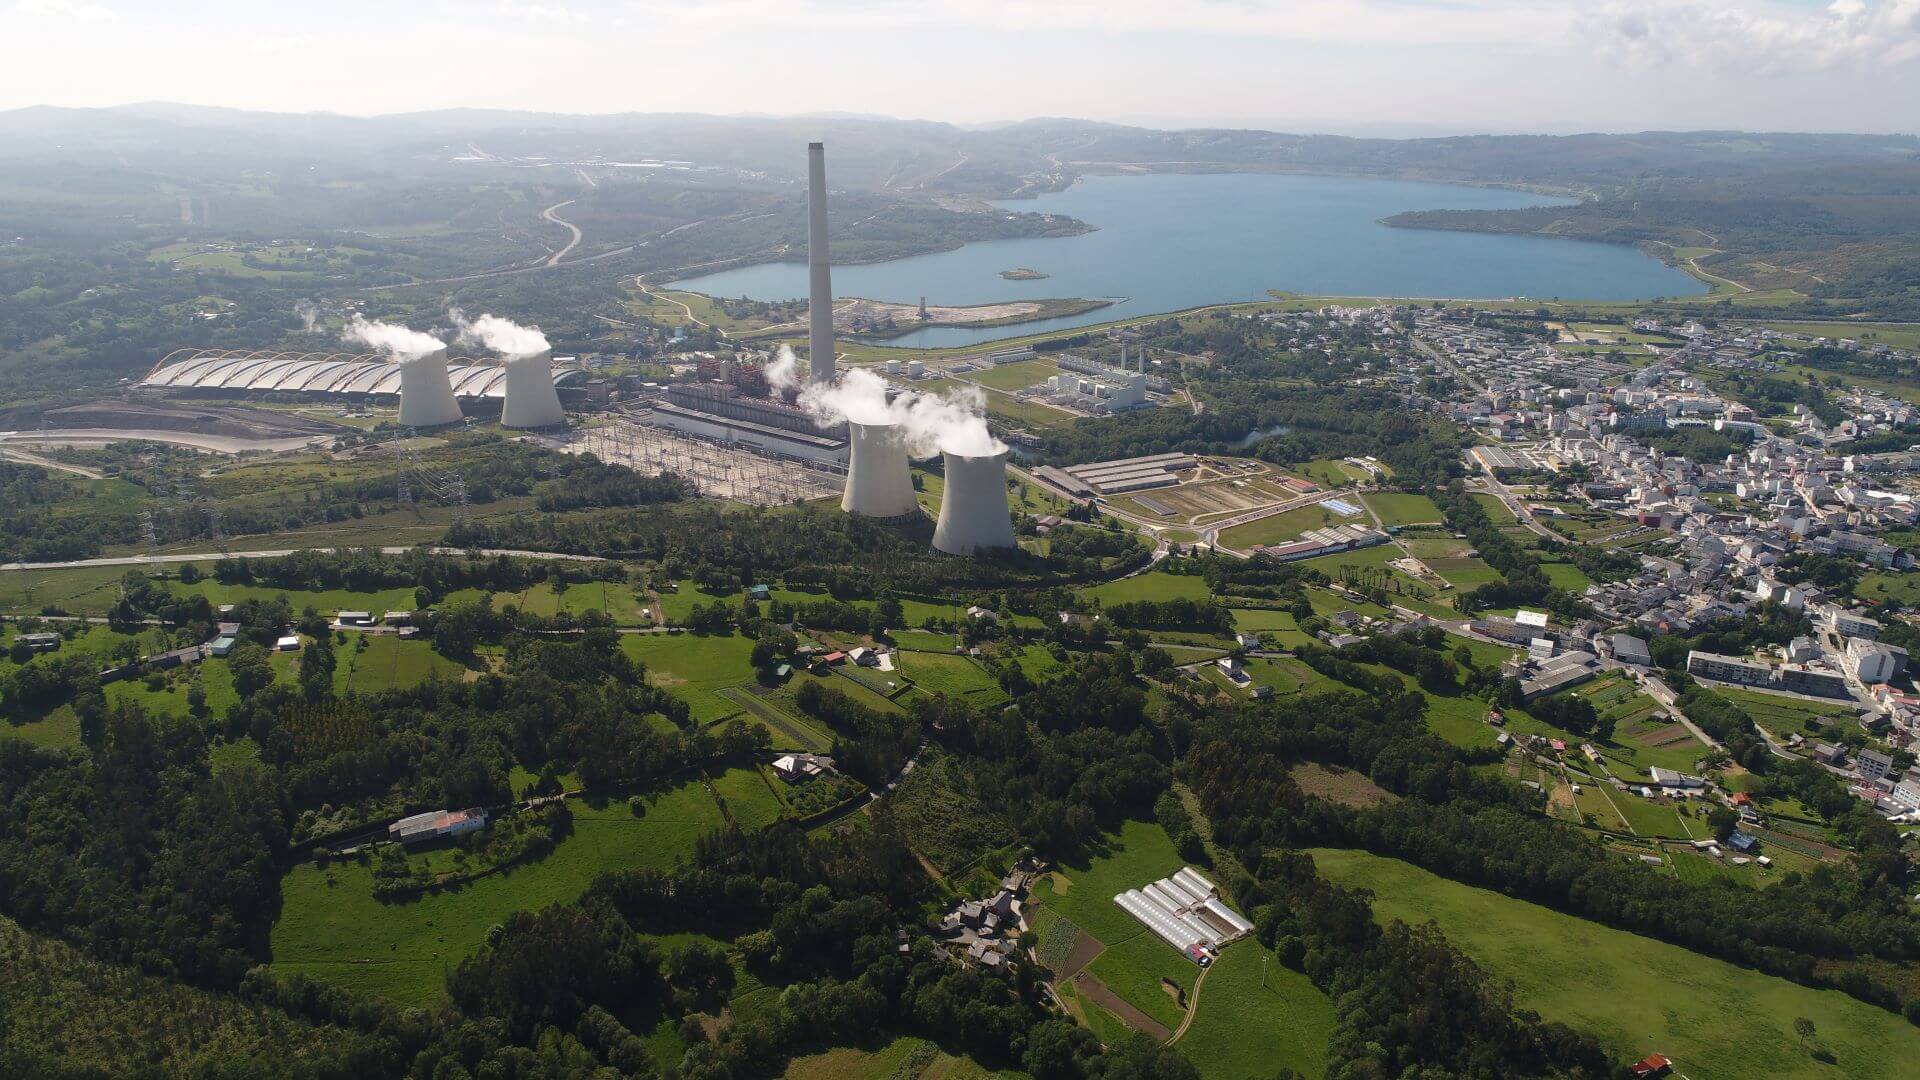 Aerial view of power plant, with lake in the background